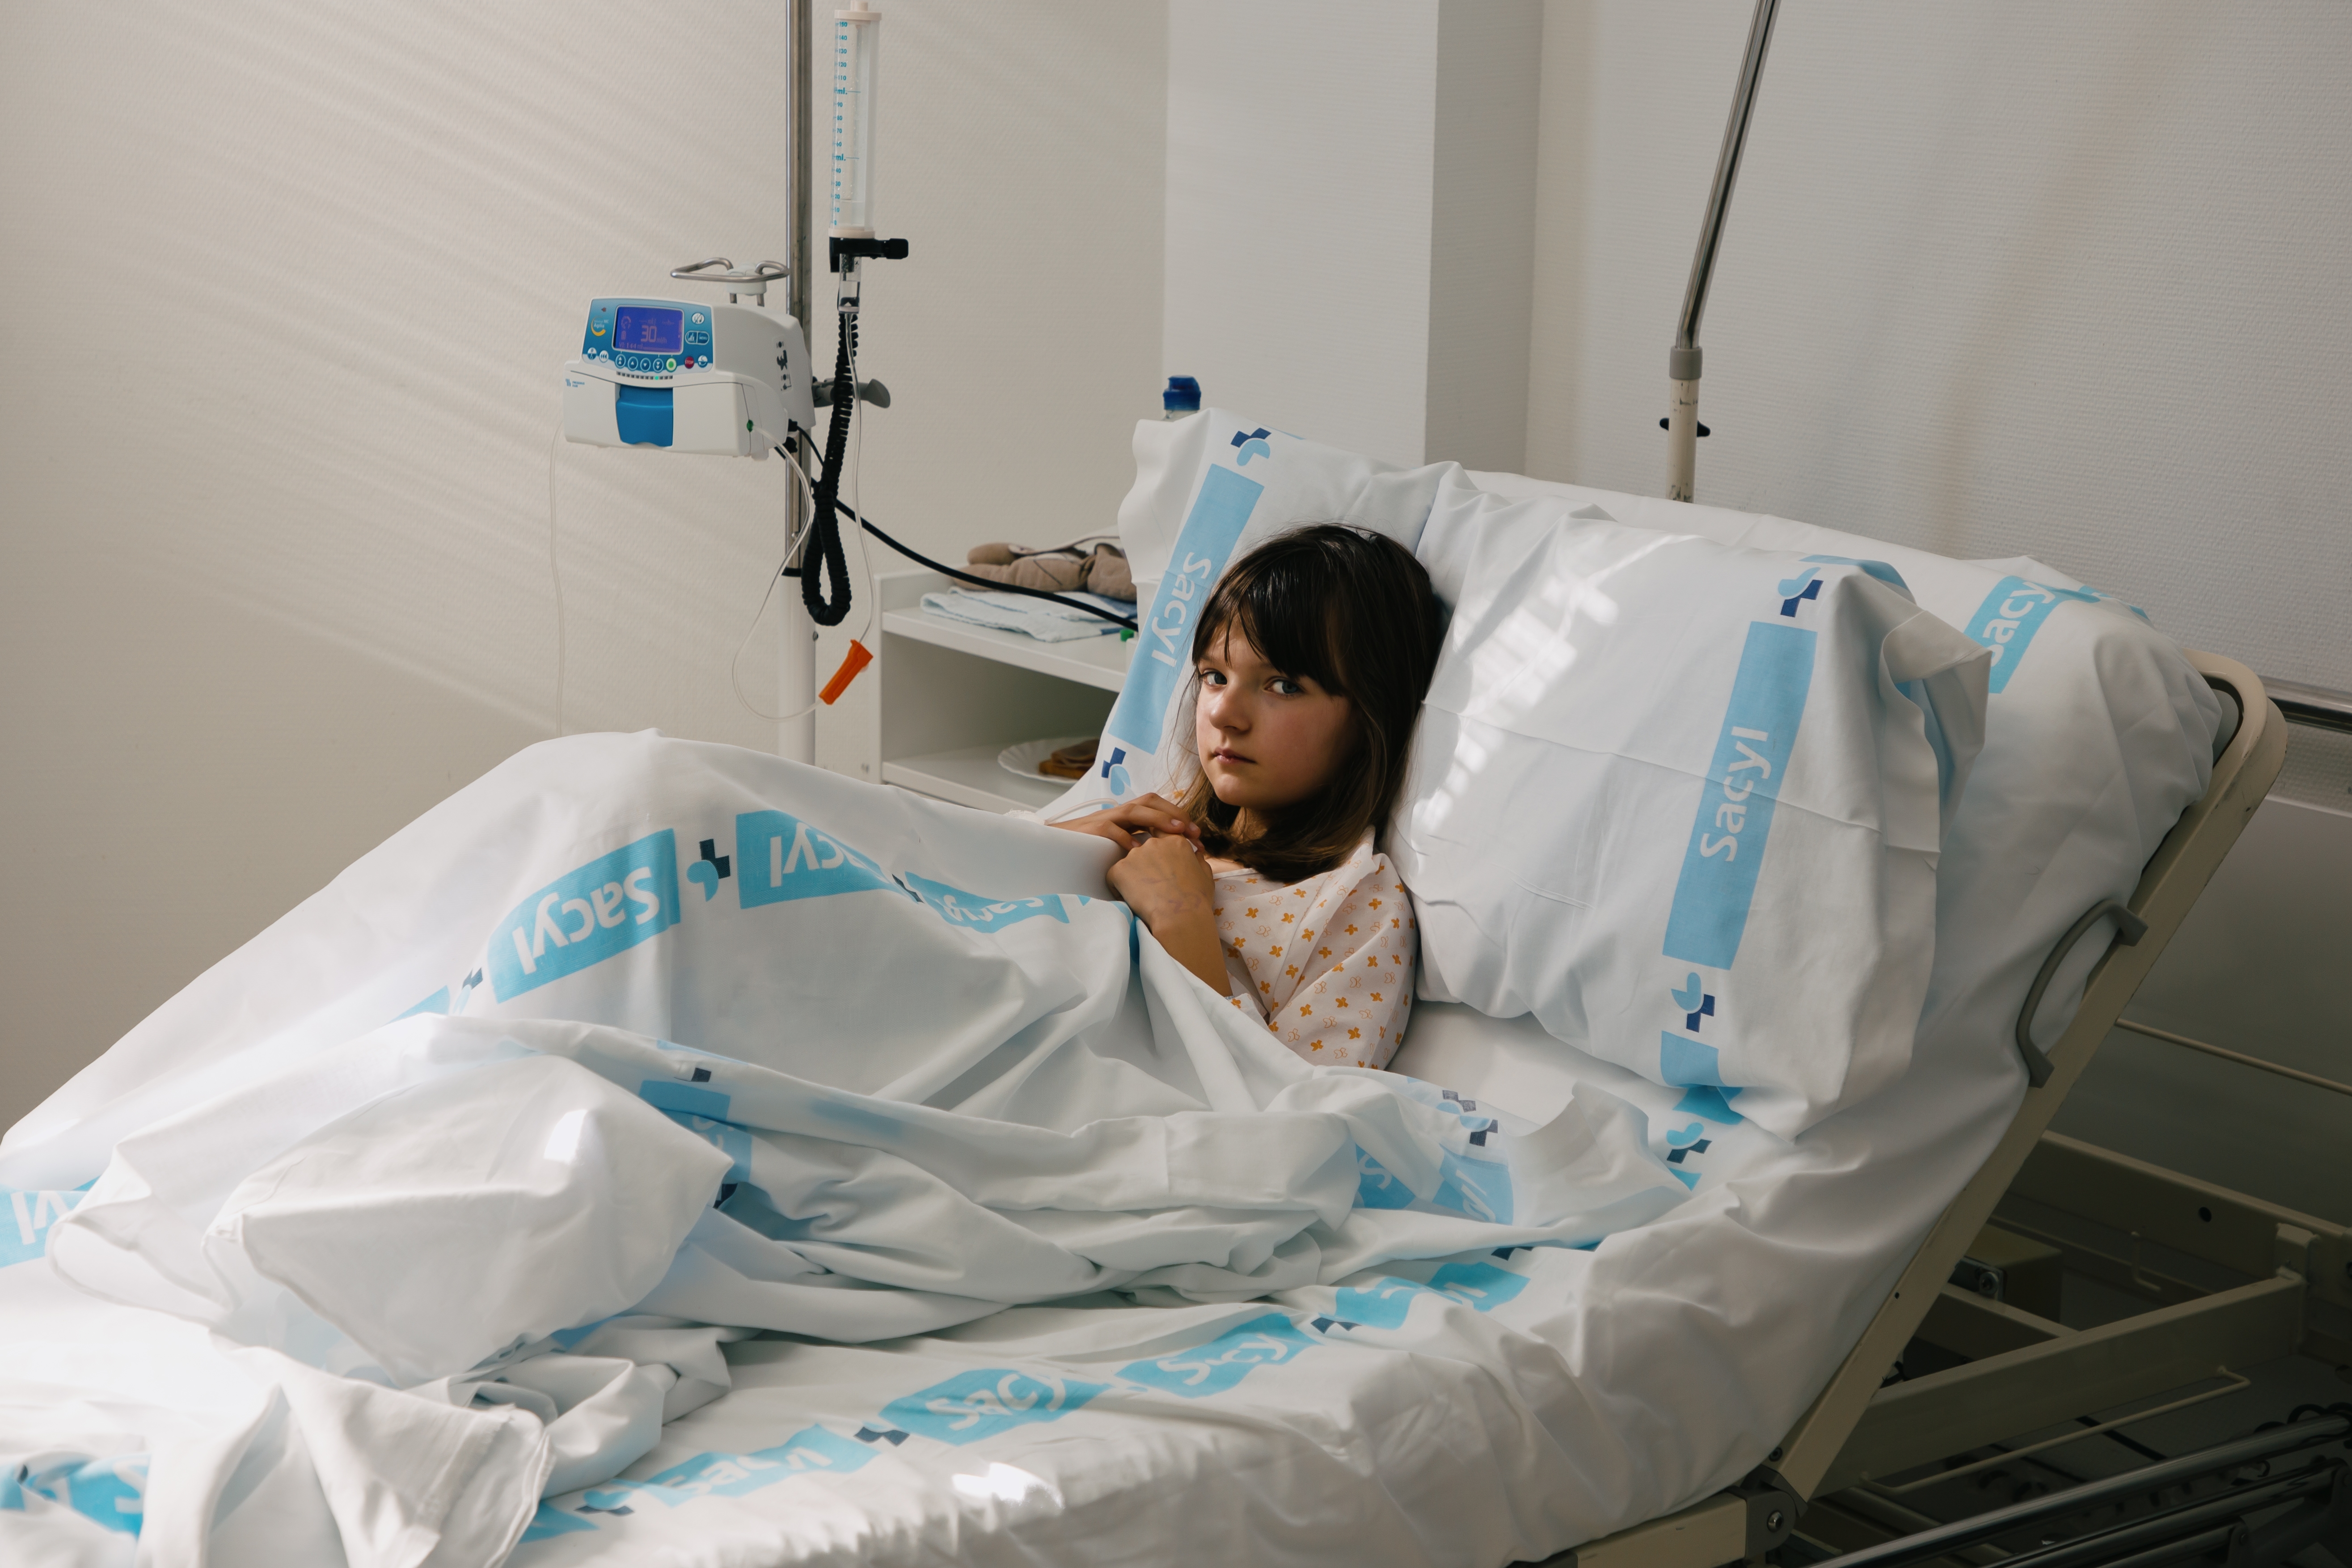 The girl lies on a hospital bed | Source: Shutterstock.com